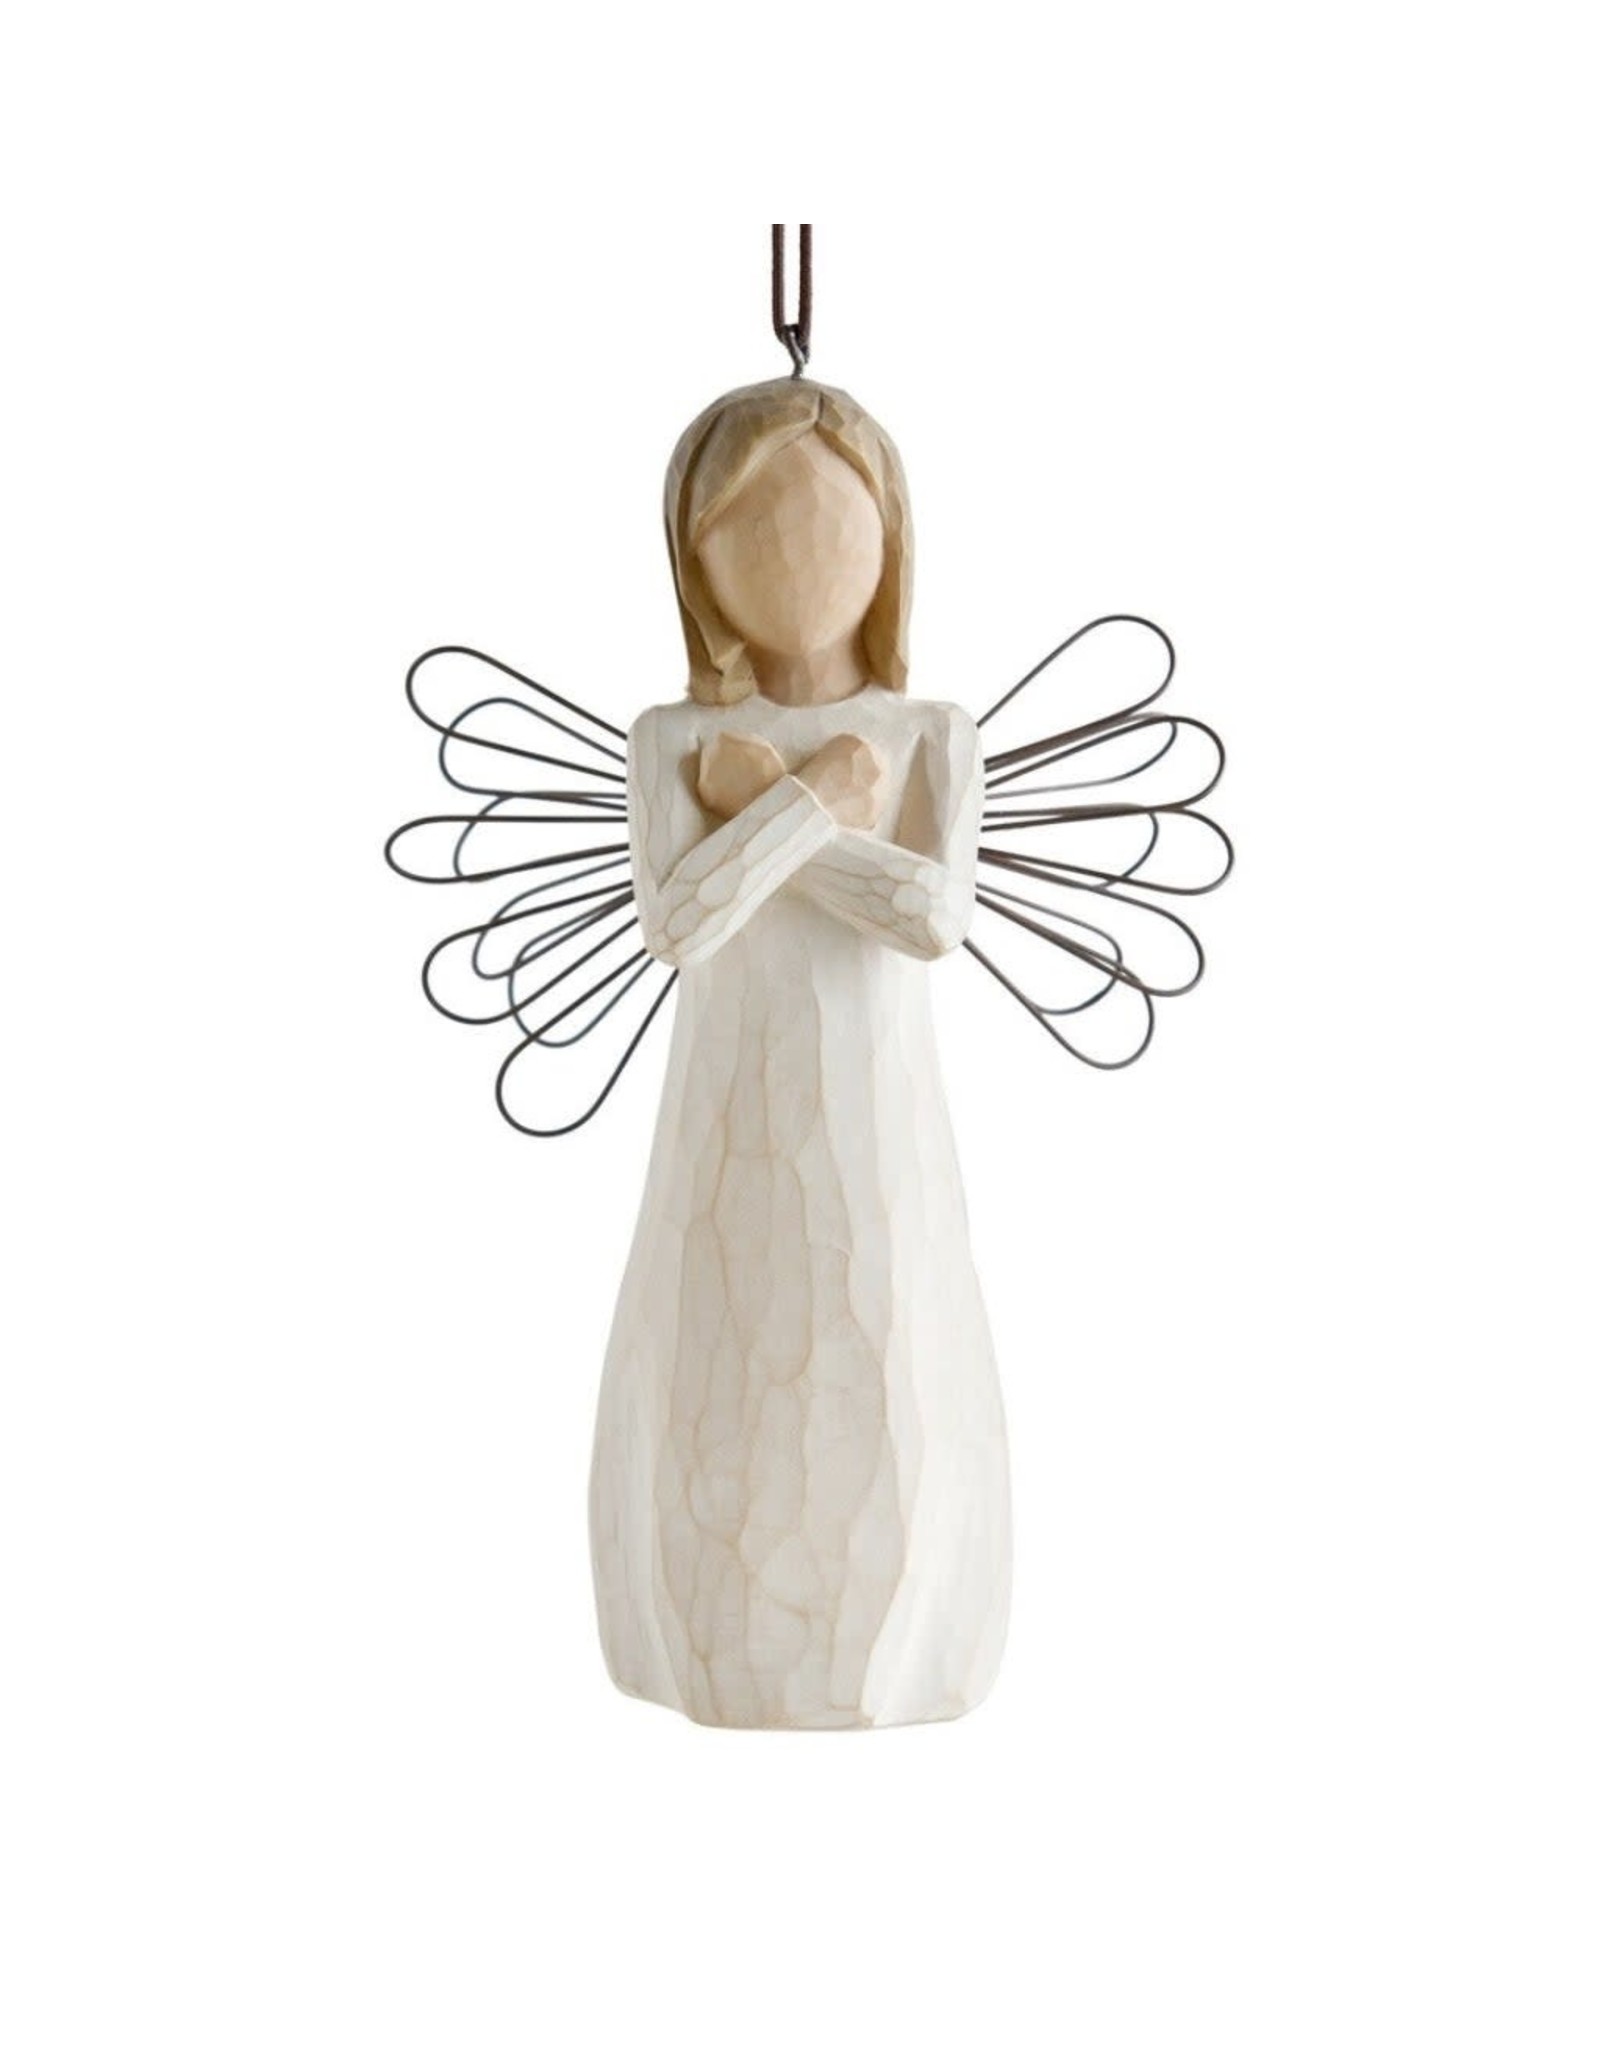 Willow Tree Willow Tree Ornament "Sign for Love"